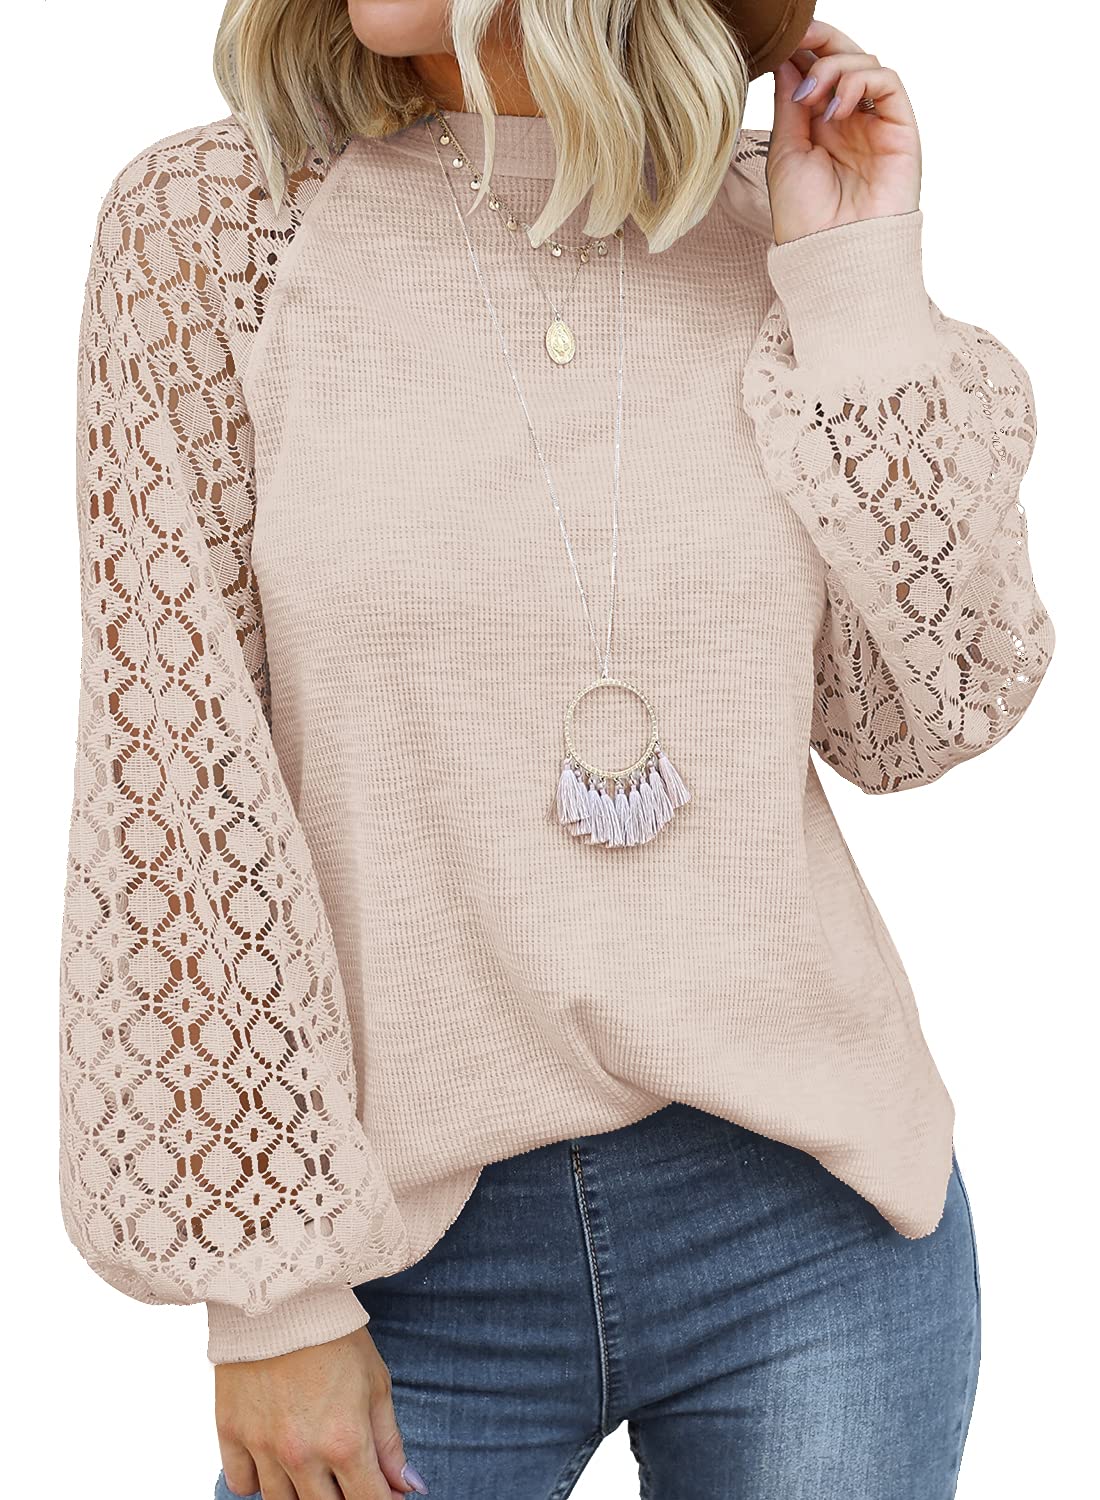 Women’s Long Sleeve Lace Casual Tops 